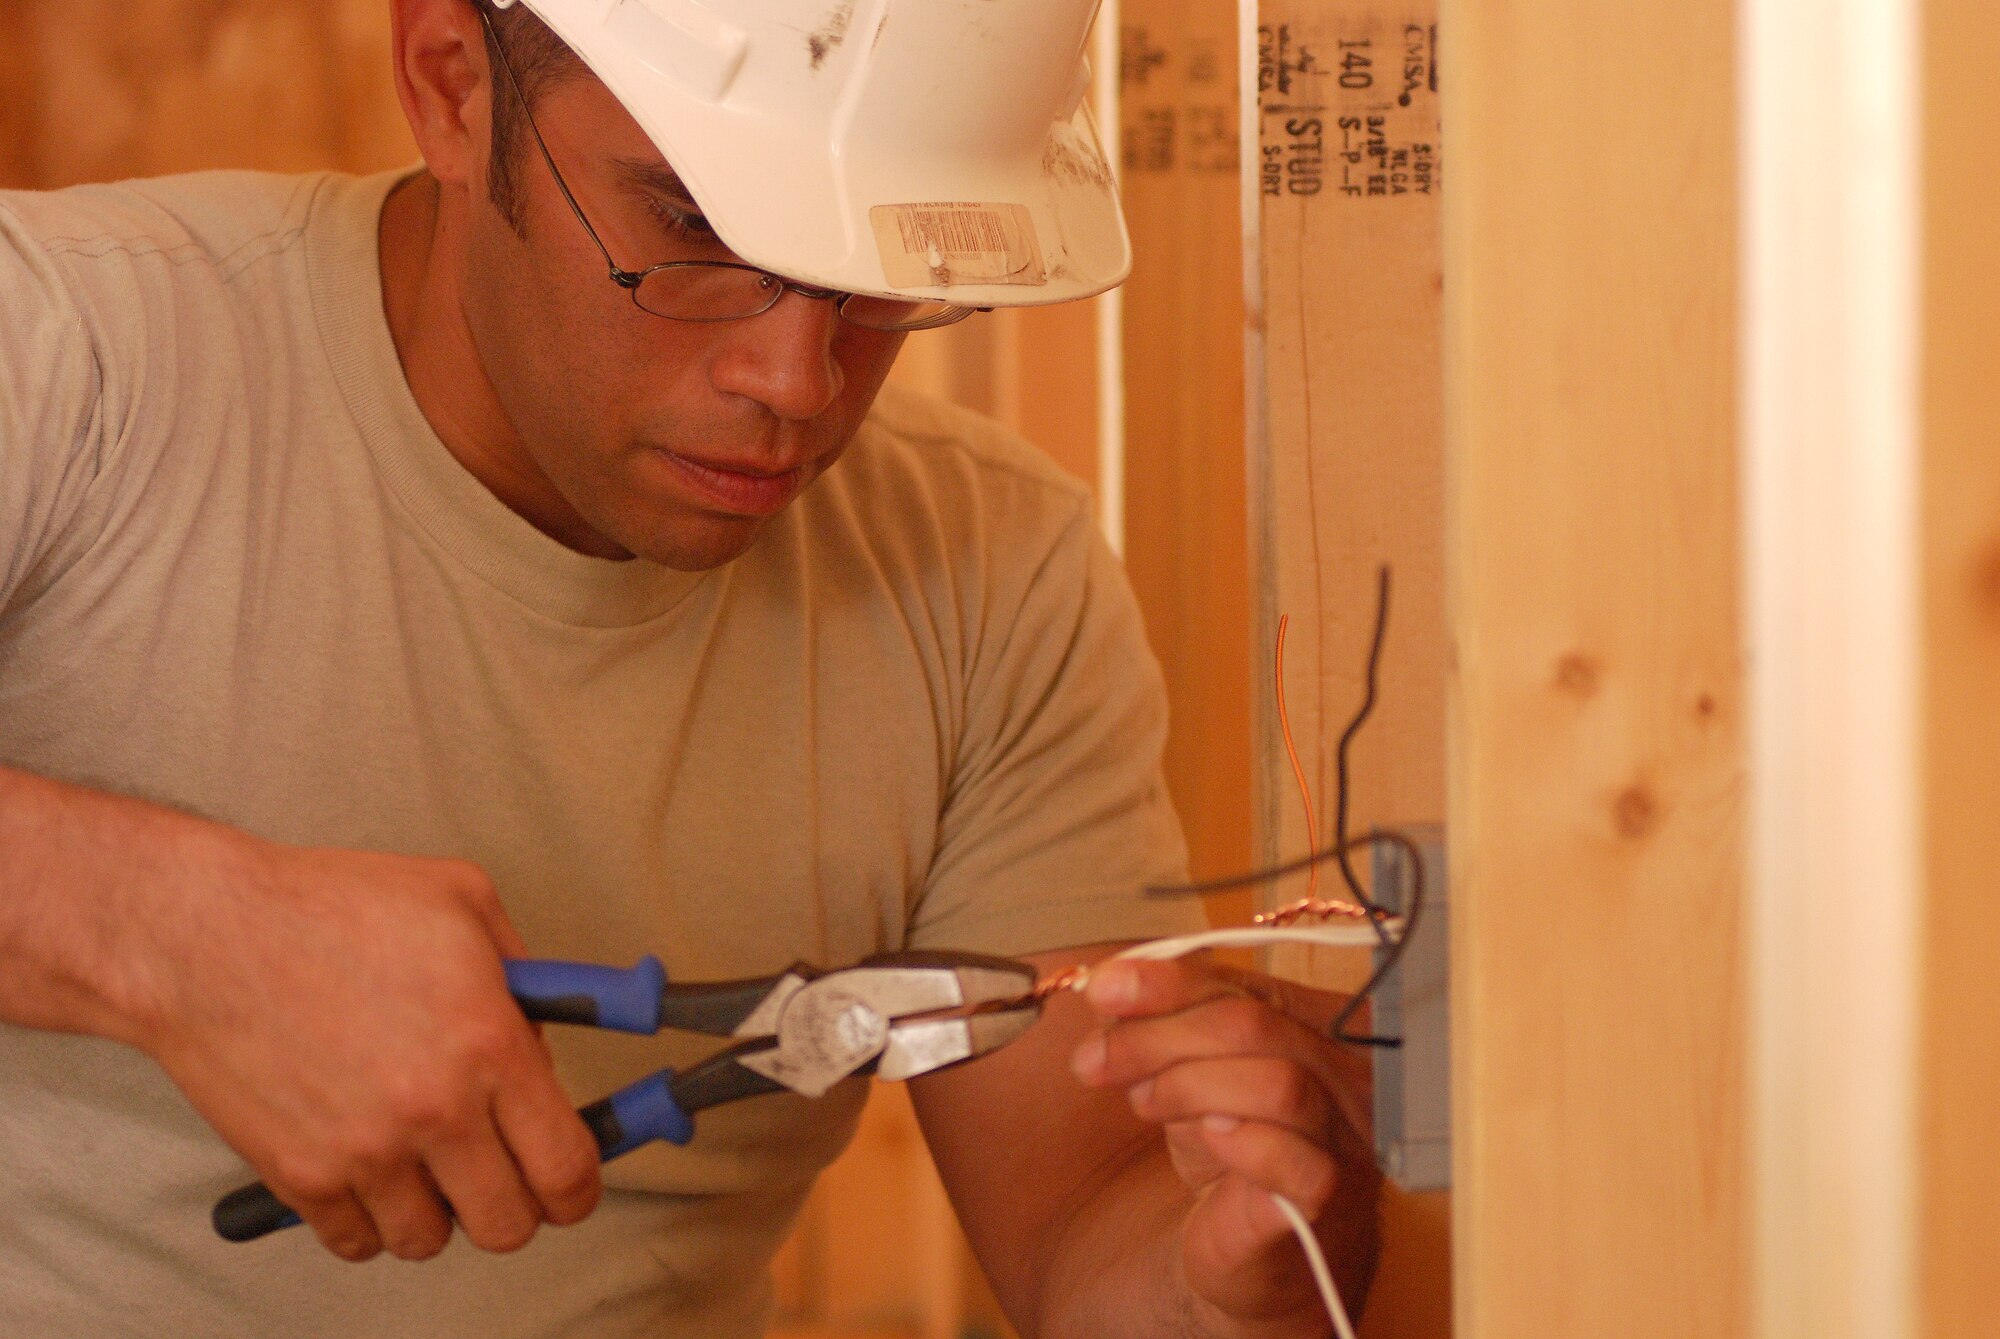 Members of the 433rd Civil Engineering Squadron conduct a humanitarian mission in the Red Lake Indian Reservation for the Red Lake band of Chippewa Indians, just outside of Bemidji, Minnesota. Staff Sgt. David Bustos wires a box which will hold an electrical outlet in what will be a bedroom wall. (U.S. Air Force photo/Airman 1st Class Brian McGloin)